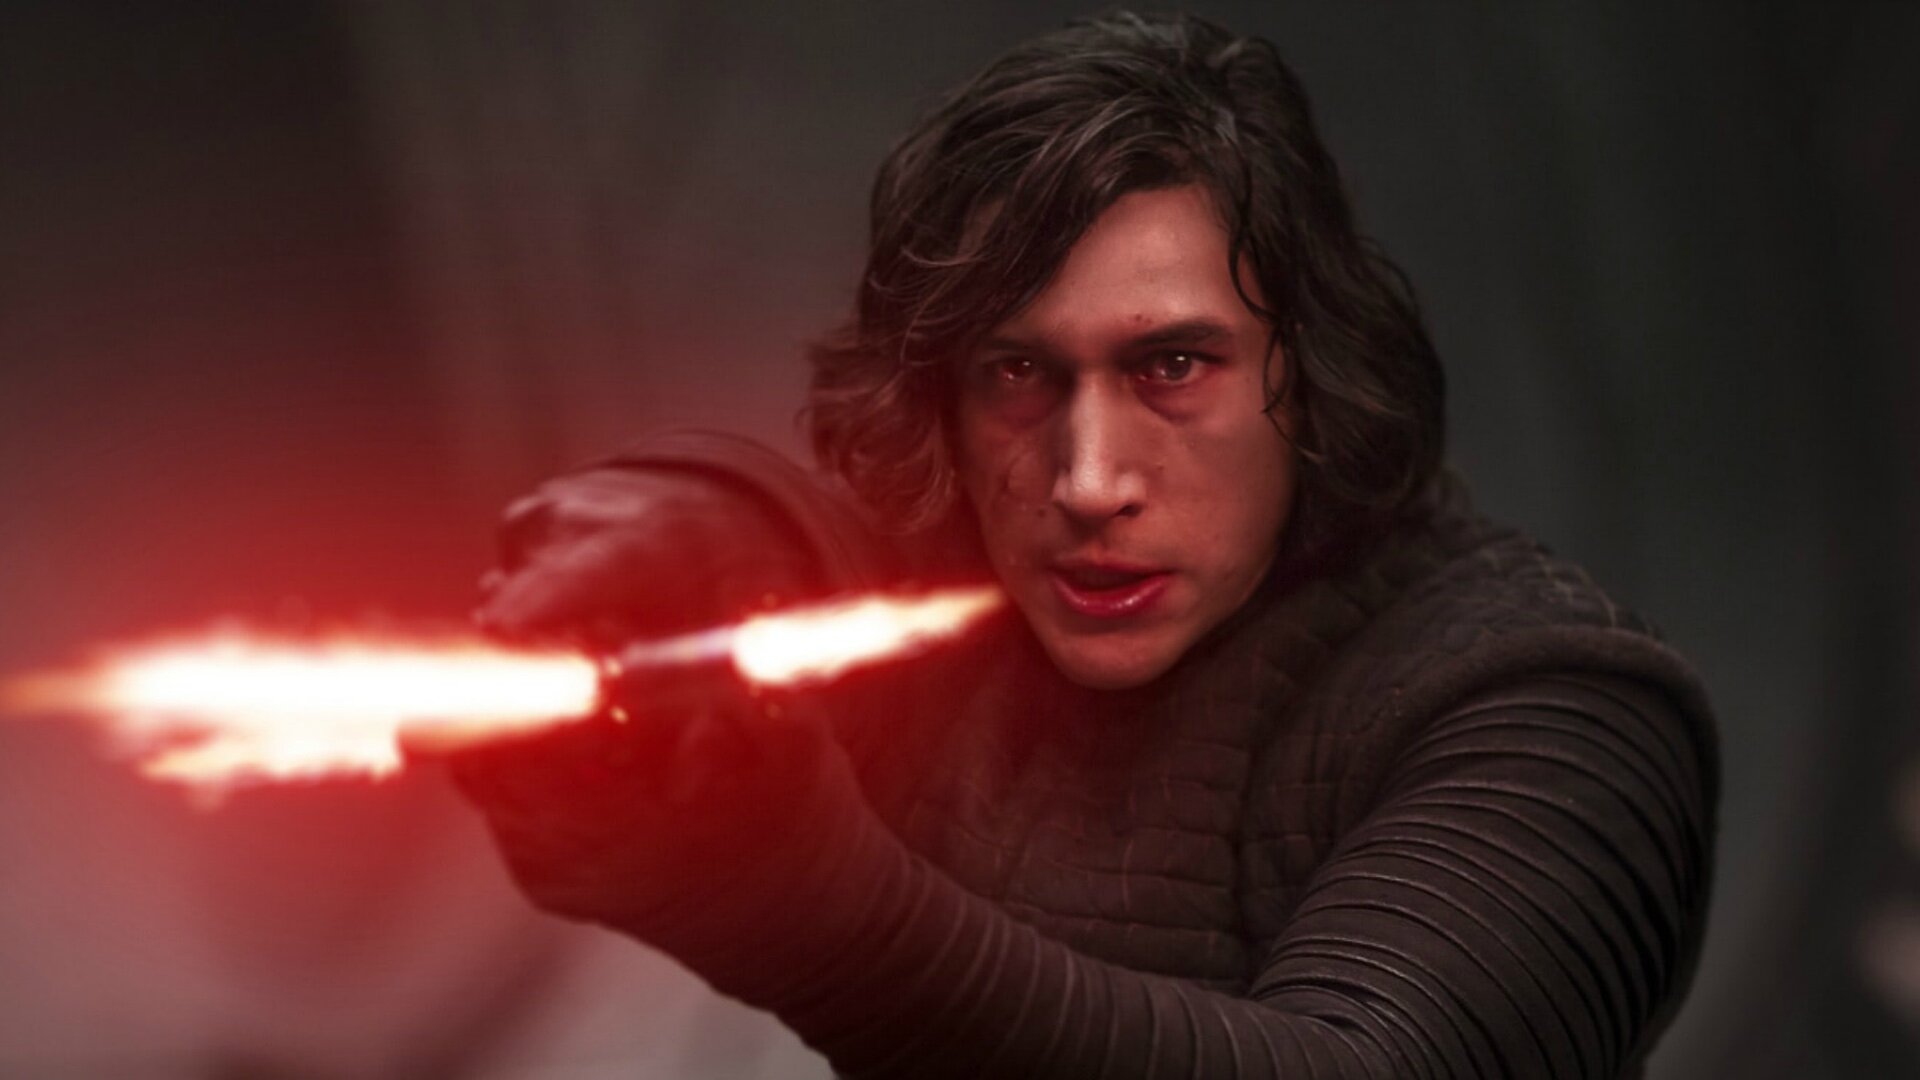 Kylo Ren Rumored To Be Getting His Own STAR WARS Series or Movie